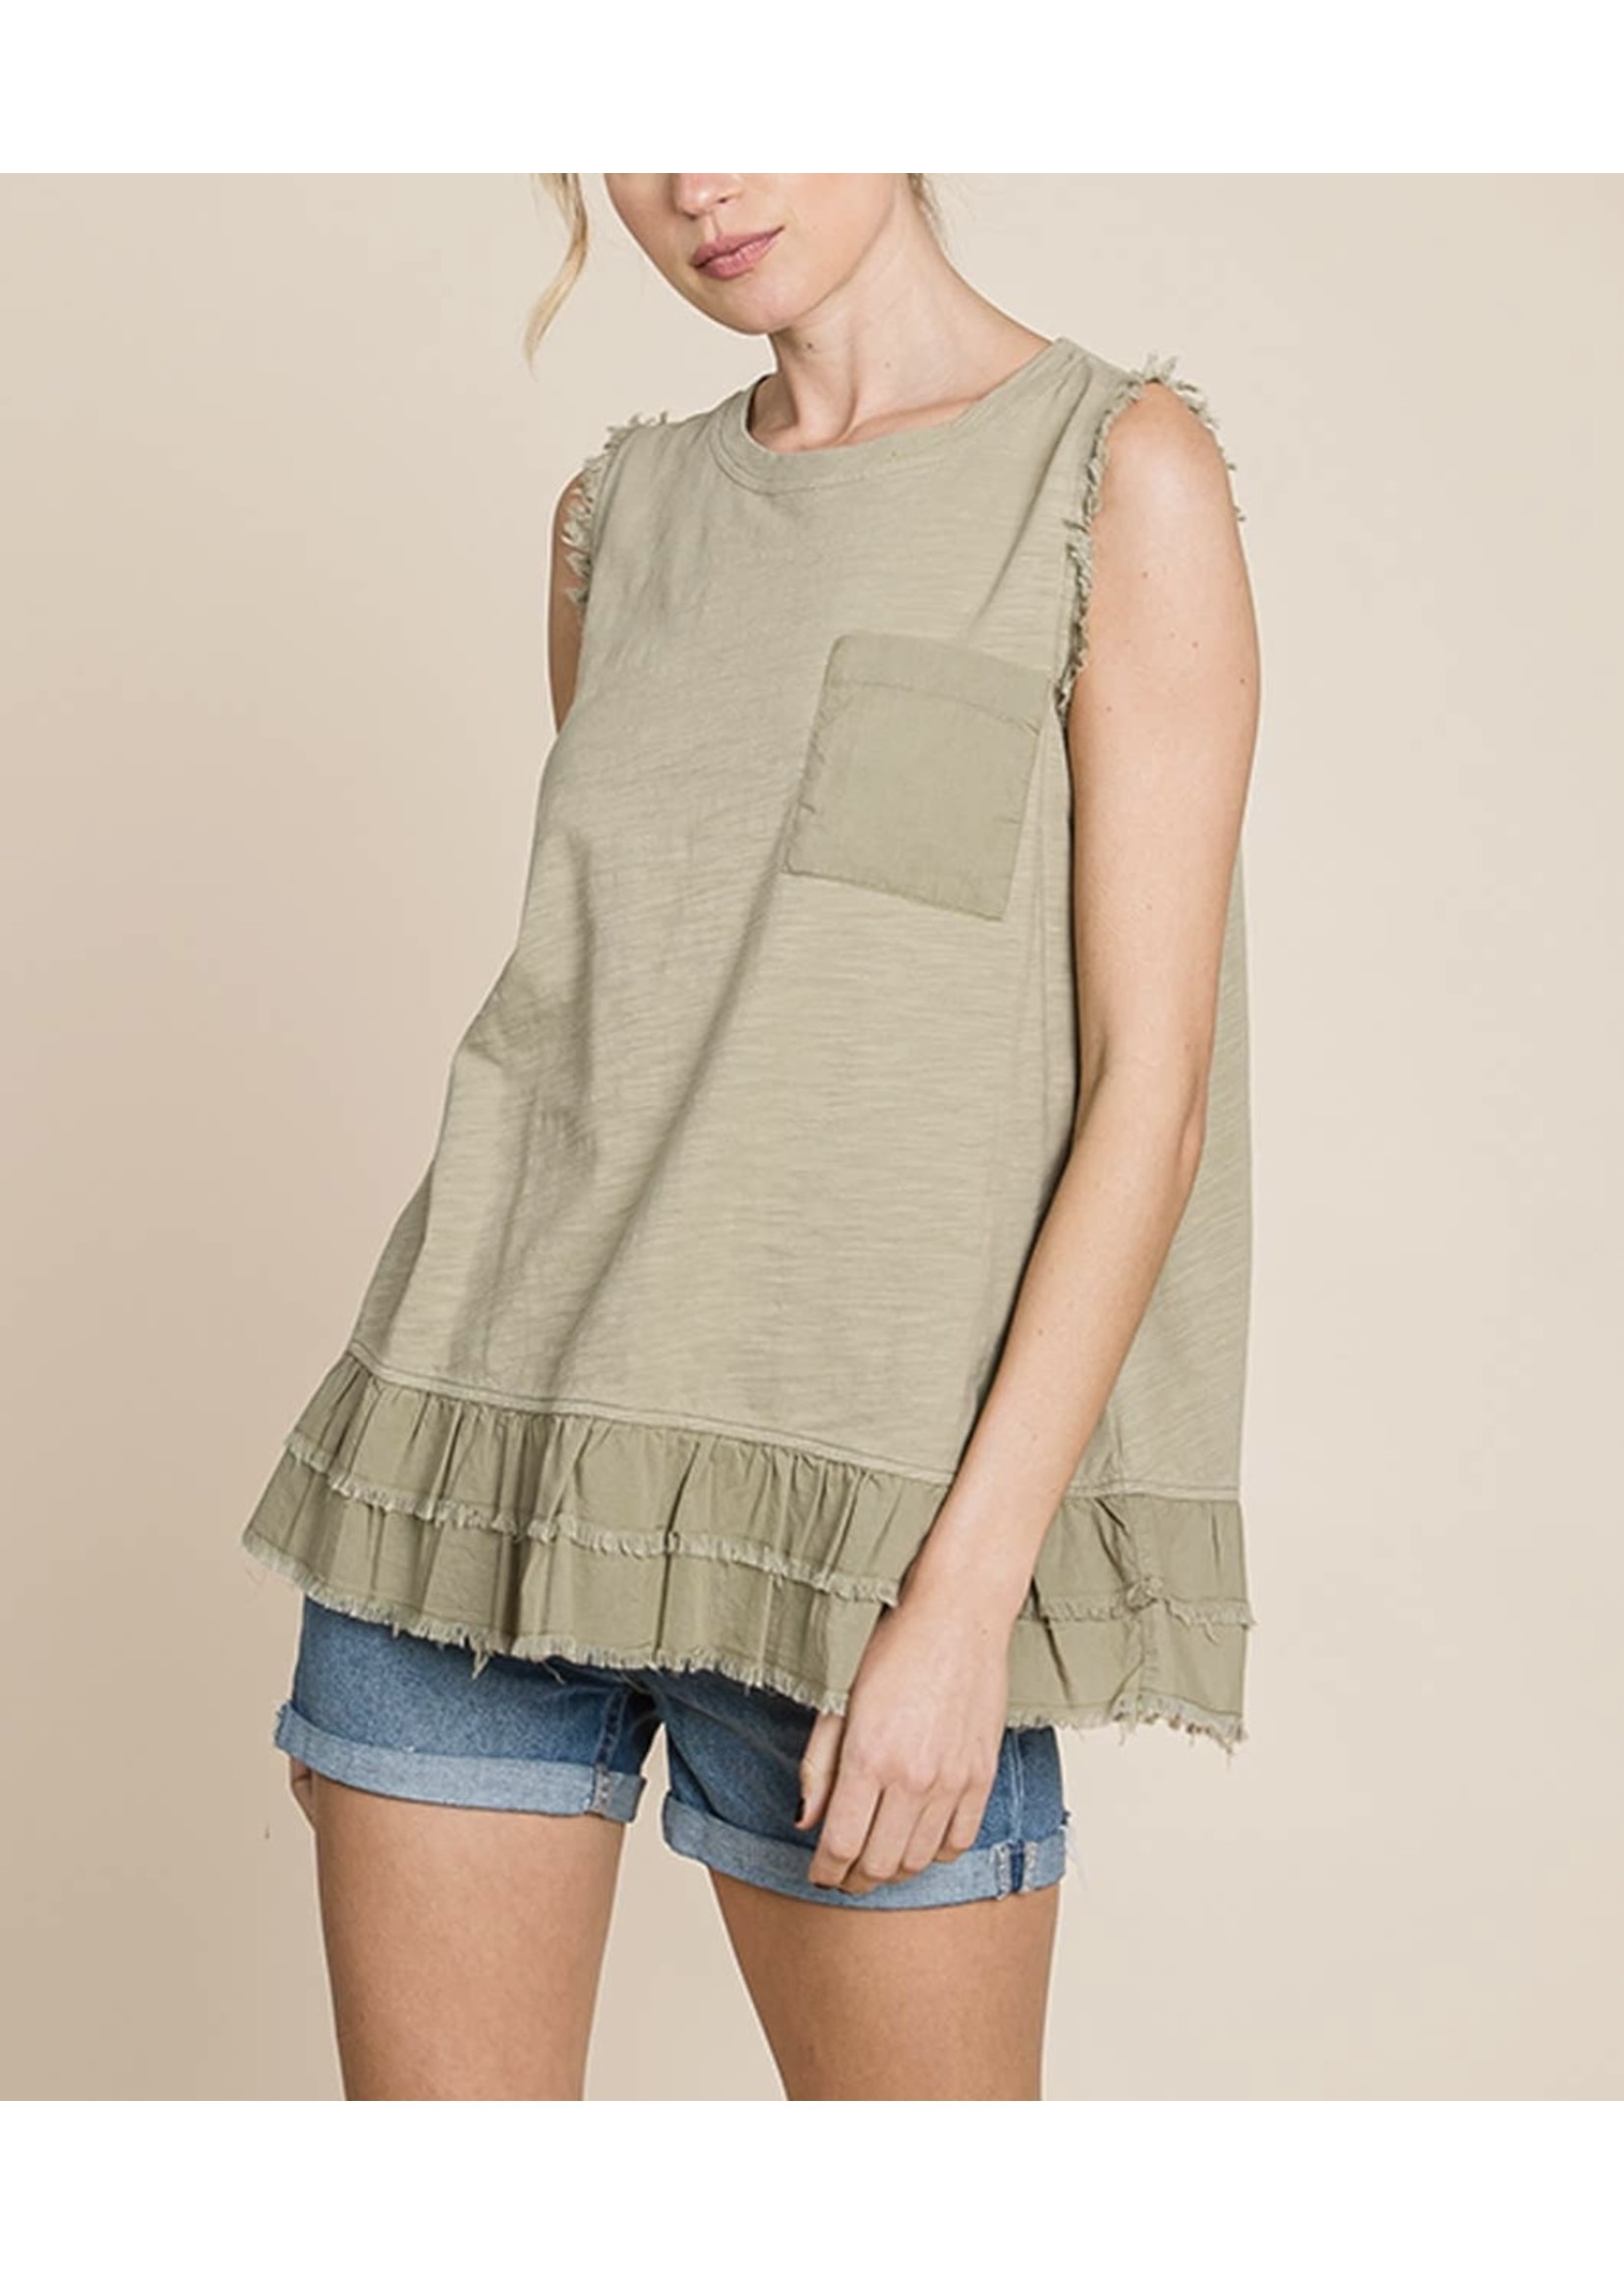 You've Got A friend Olive Washed Fray Detailed Ruffle Bottom Top